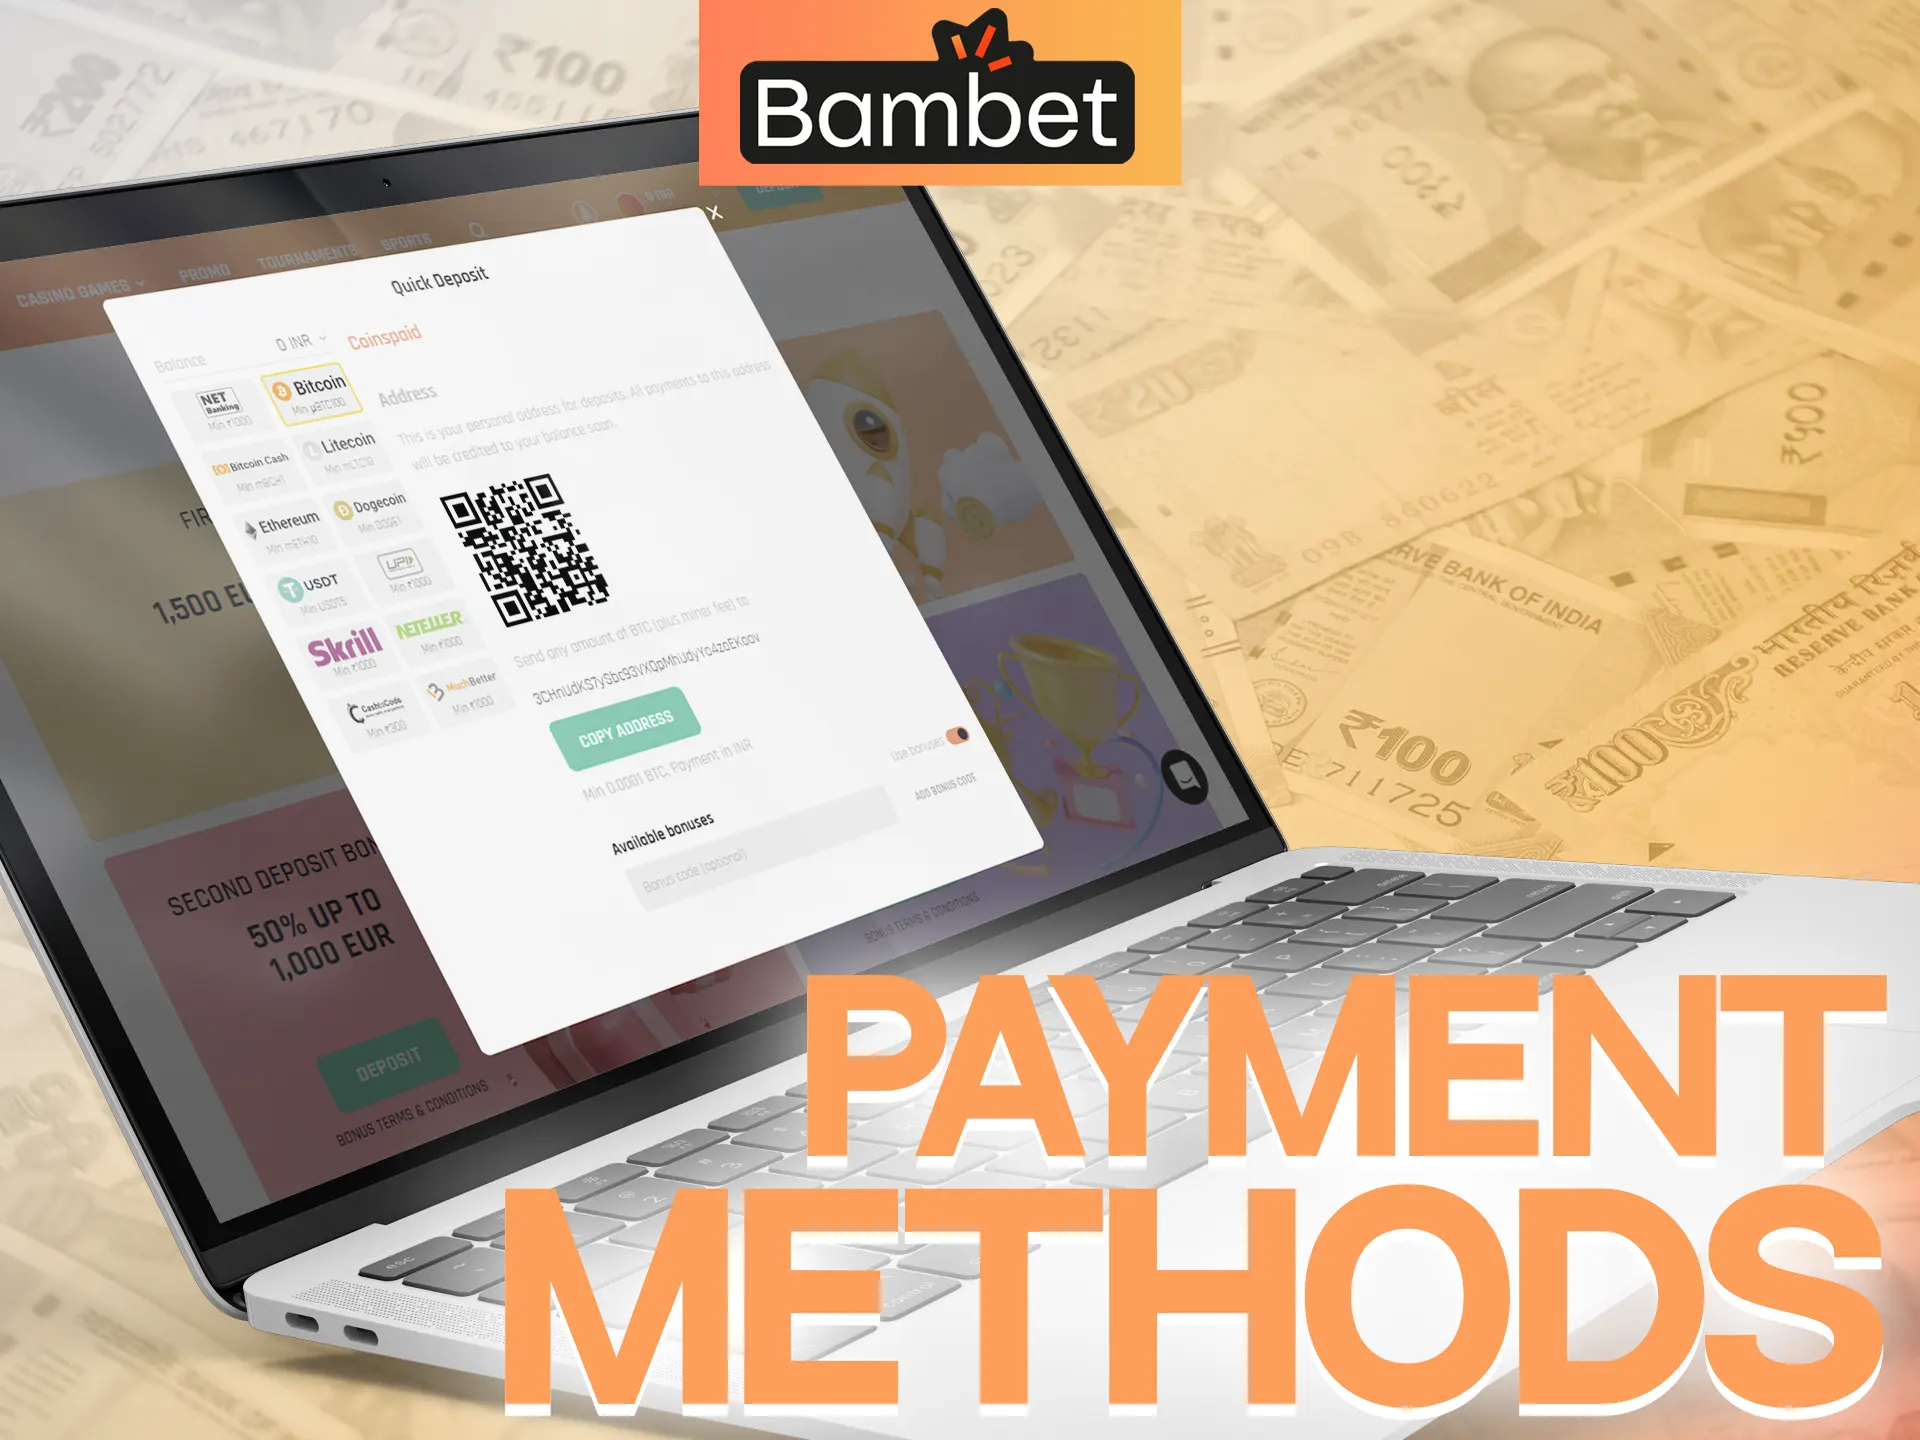 At Bambet you can easily deposit your account and withdraw all your winnings.